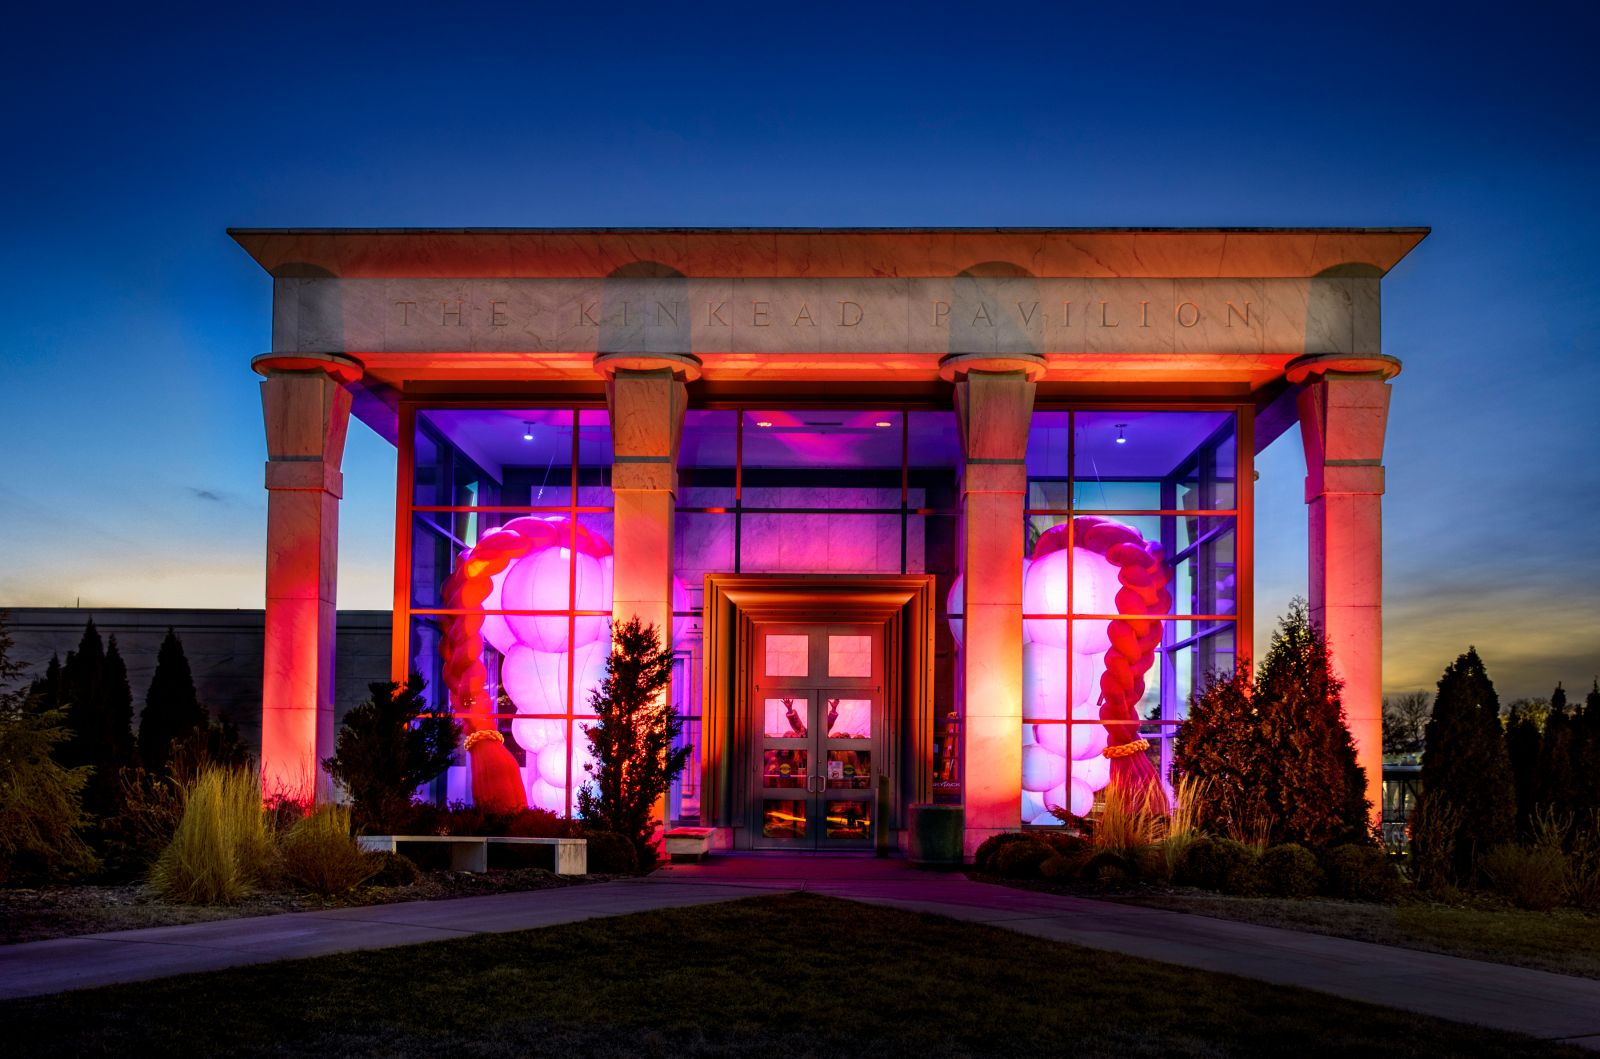 A stone building with greek-style columns is lit up at dusk. Inside it, you can see bright, lit-up sculptures: two red braids and two bunches of pale pink spheres.